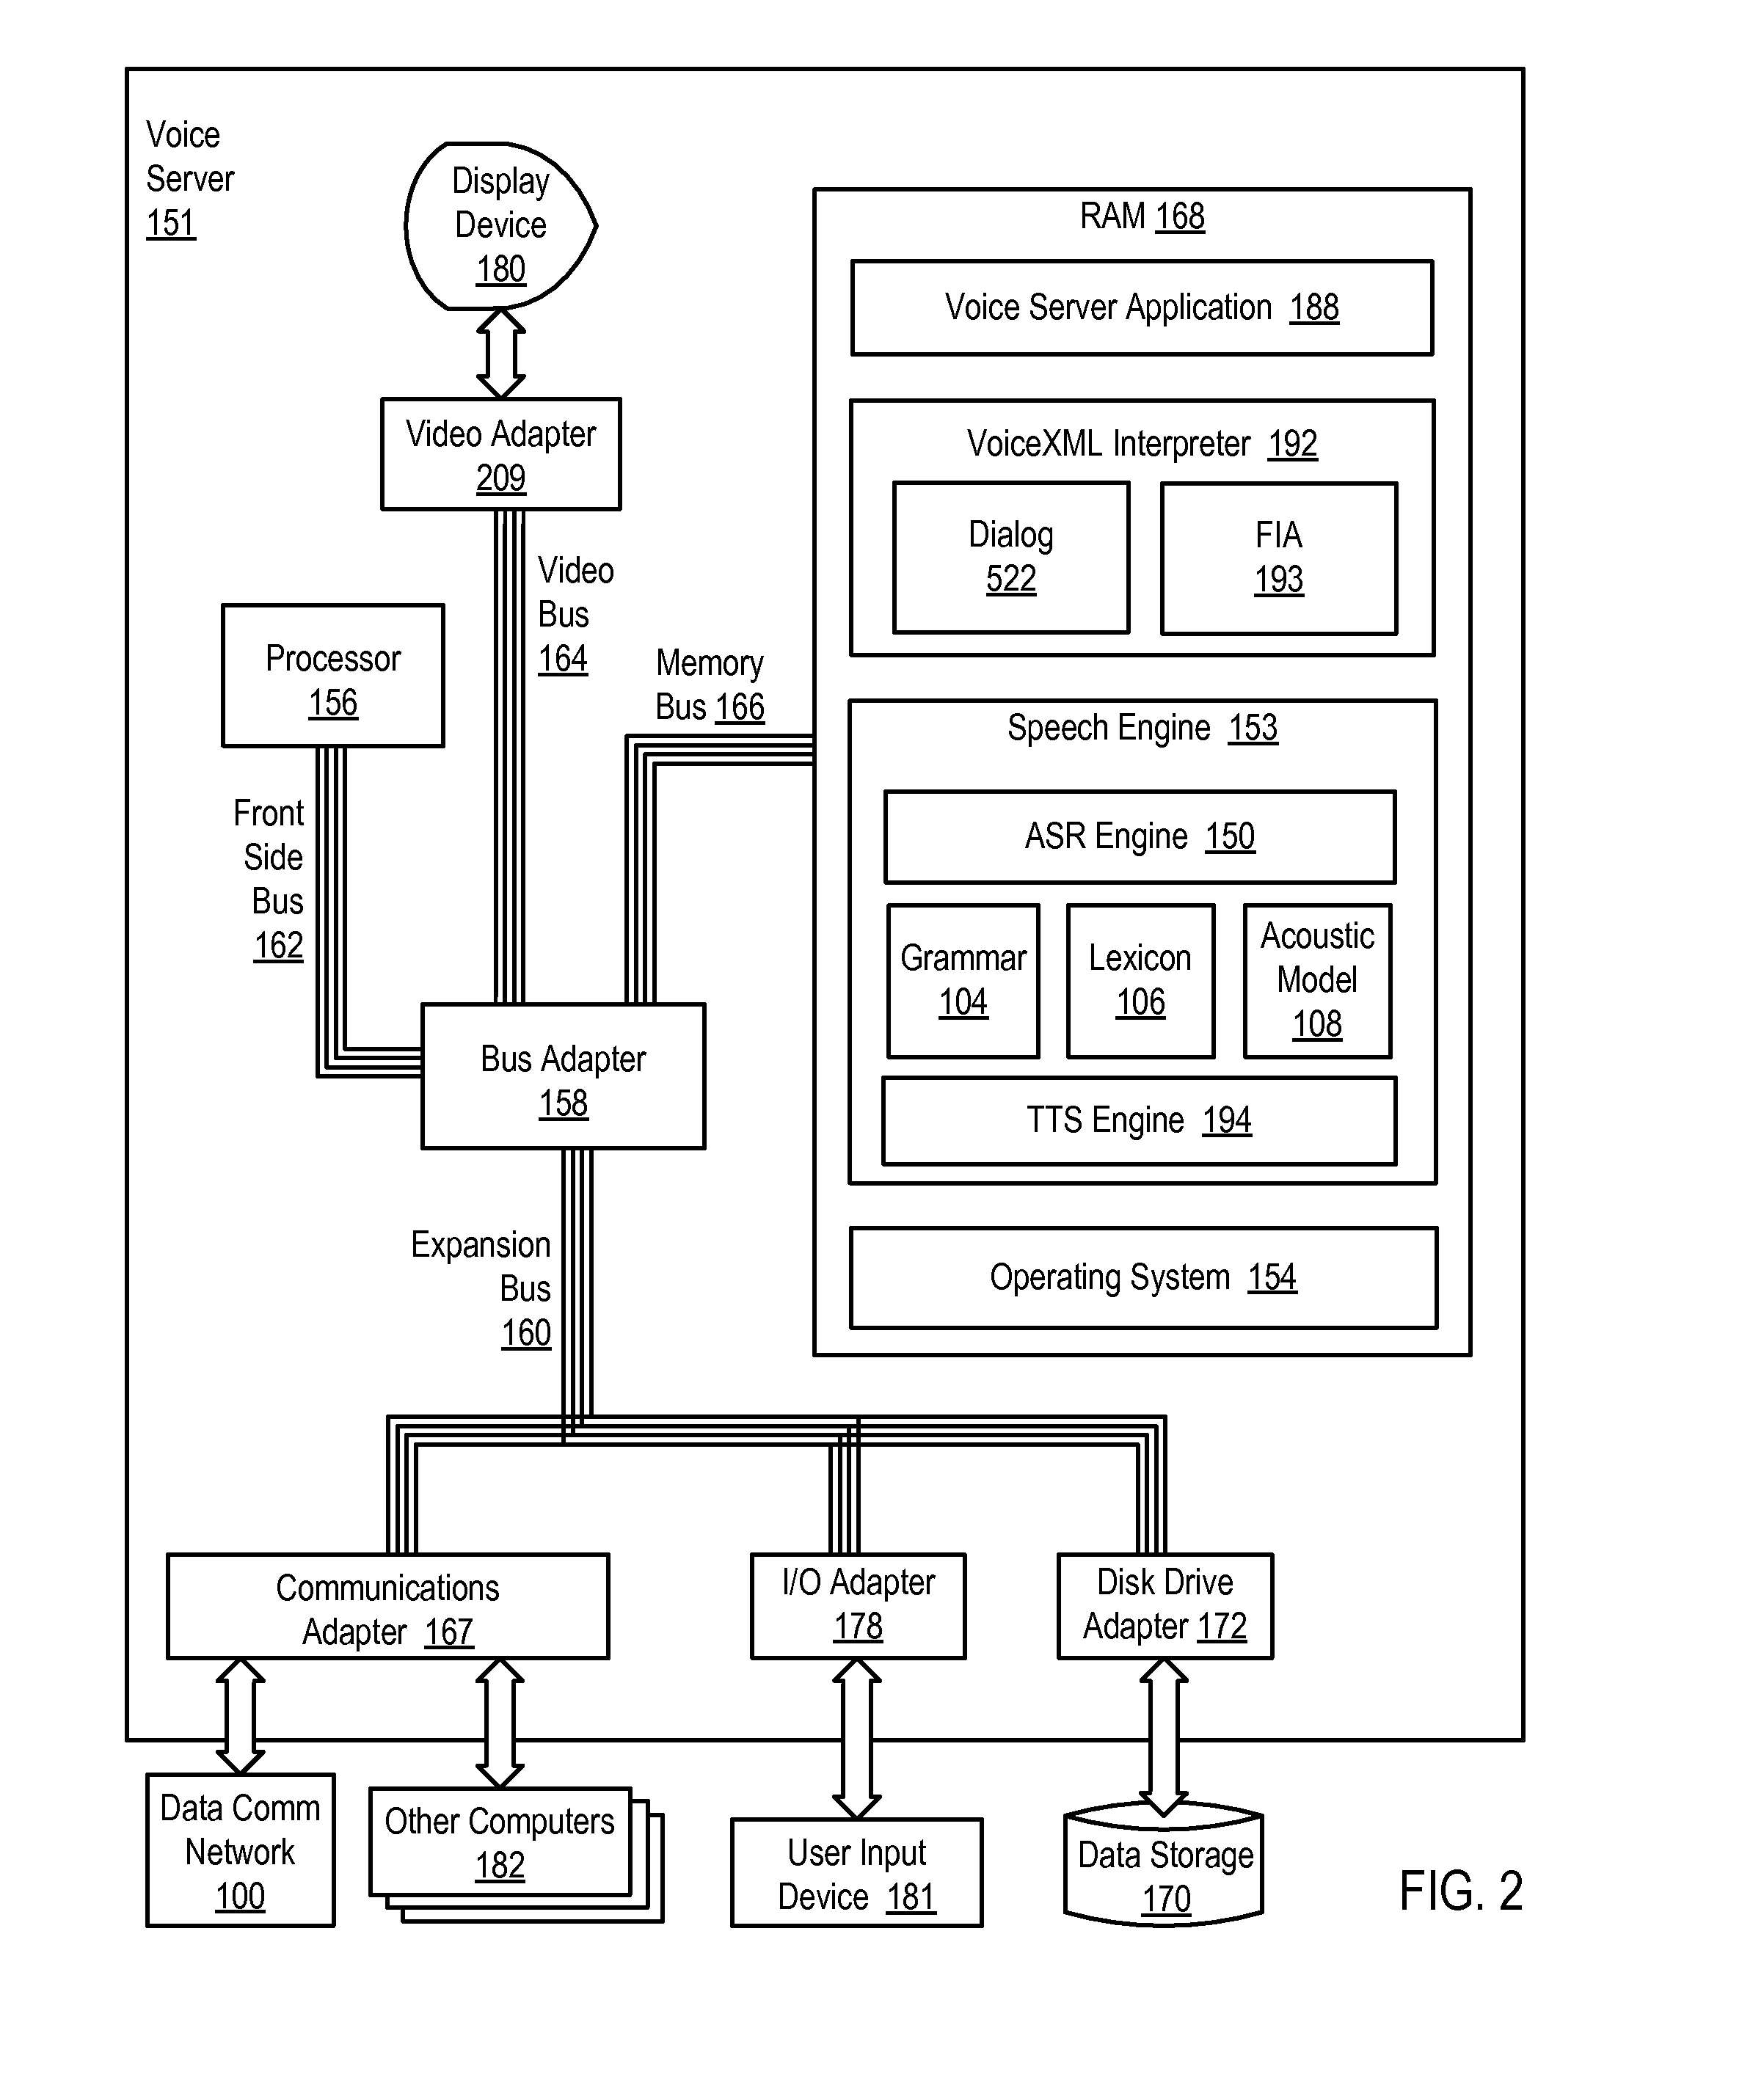 Ordering Recognition Results Produced By An Automatic Speech Recognition Engine For A Multimodal Application